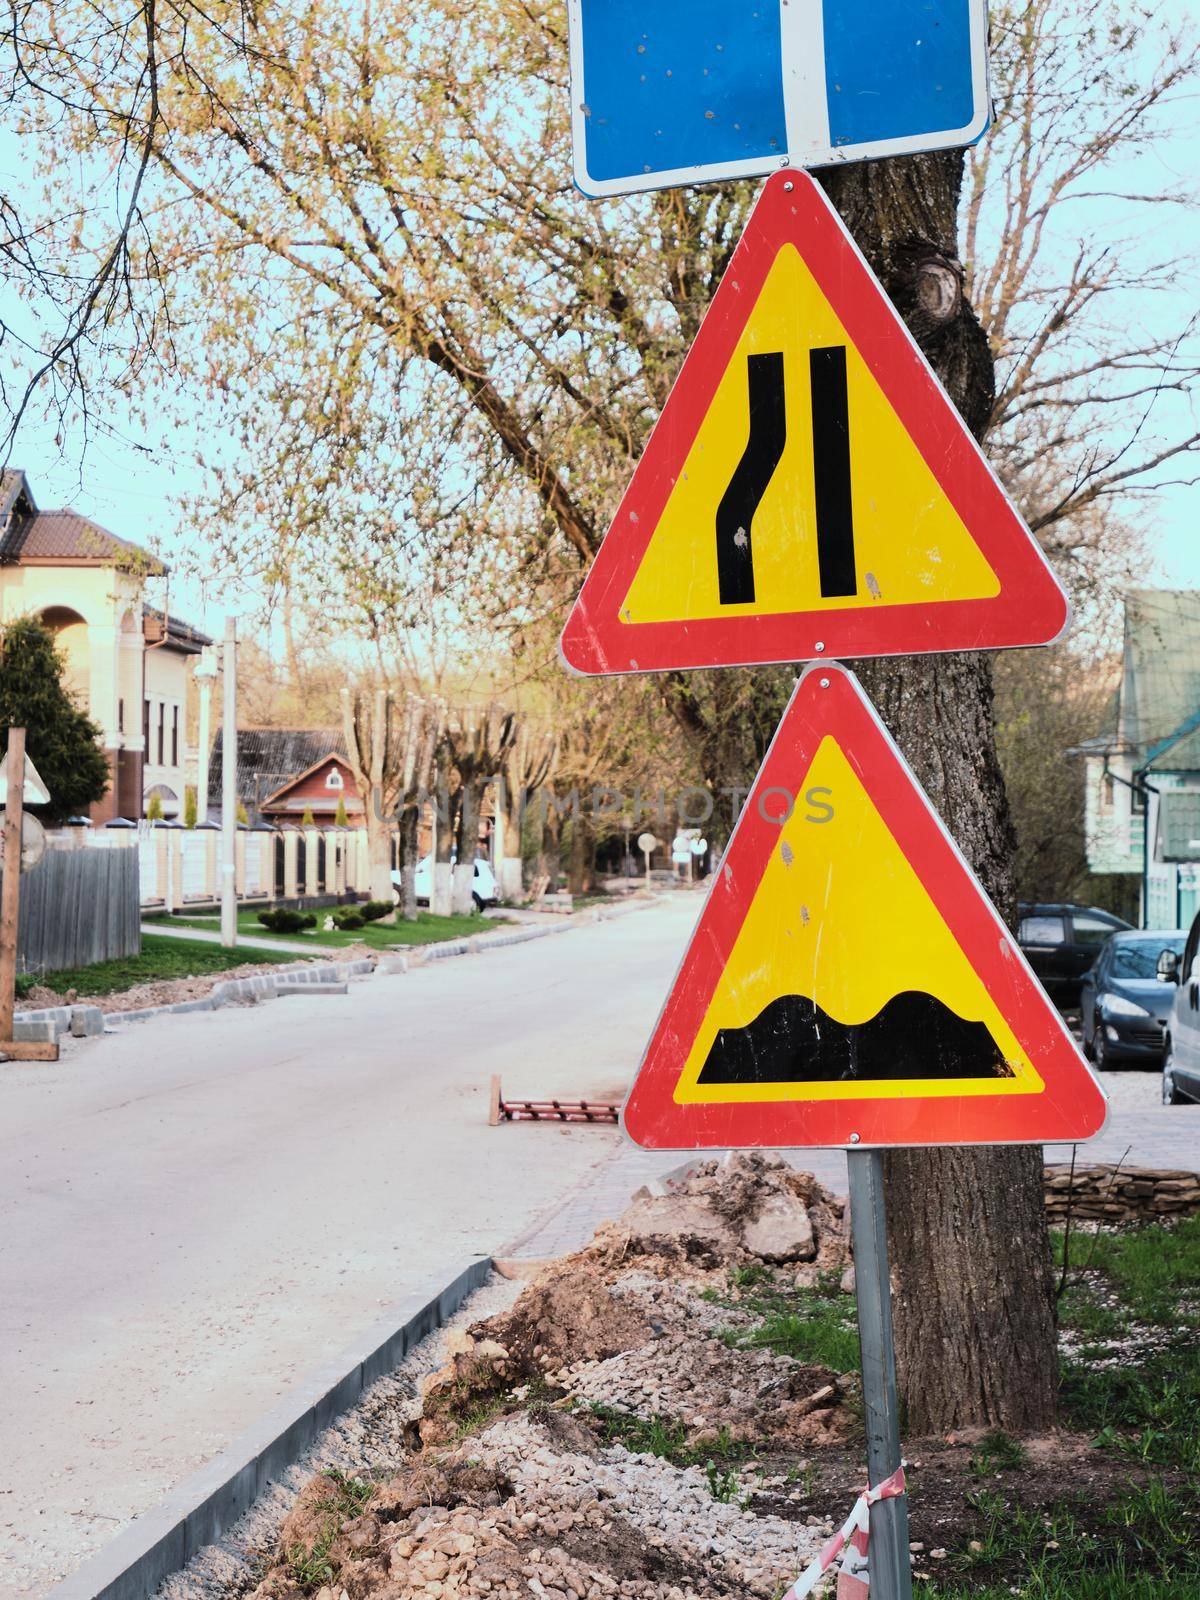 Road signs. Road works. Replacement of the road surface.